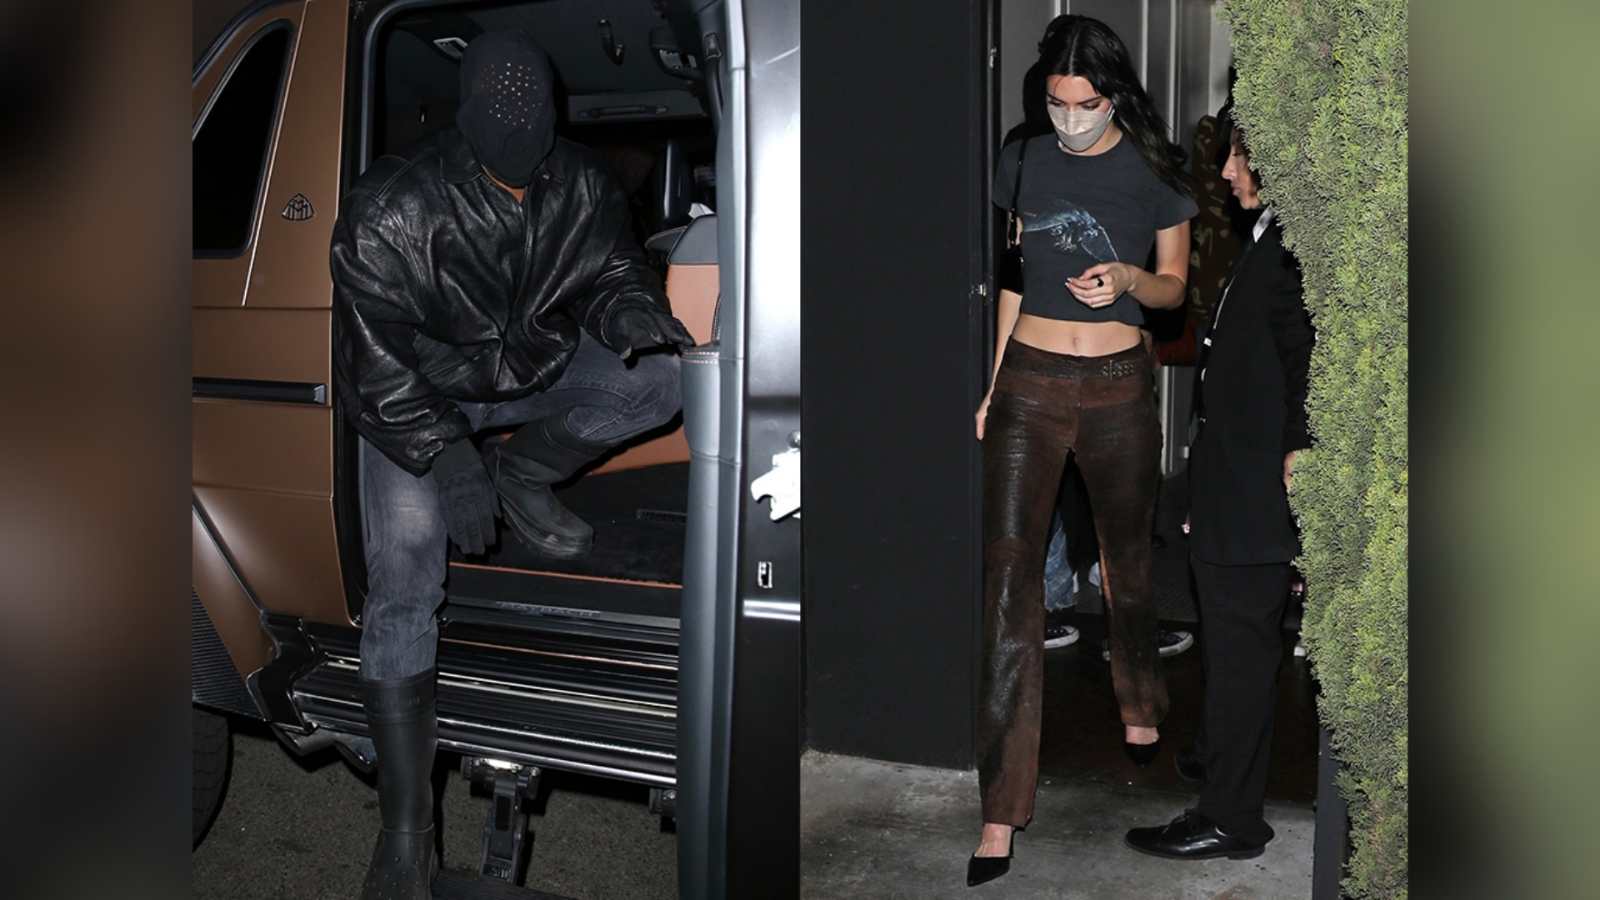 Kendall Jenner at Kanye's listening party